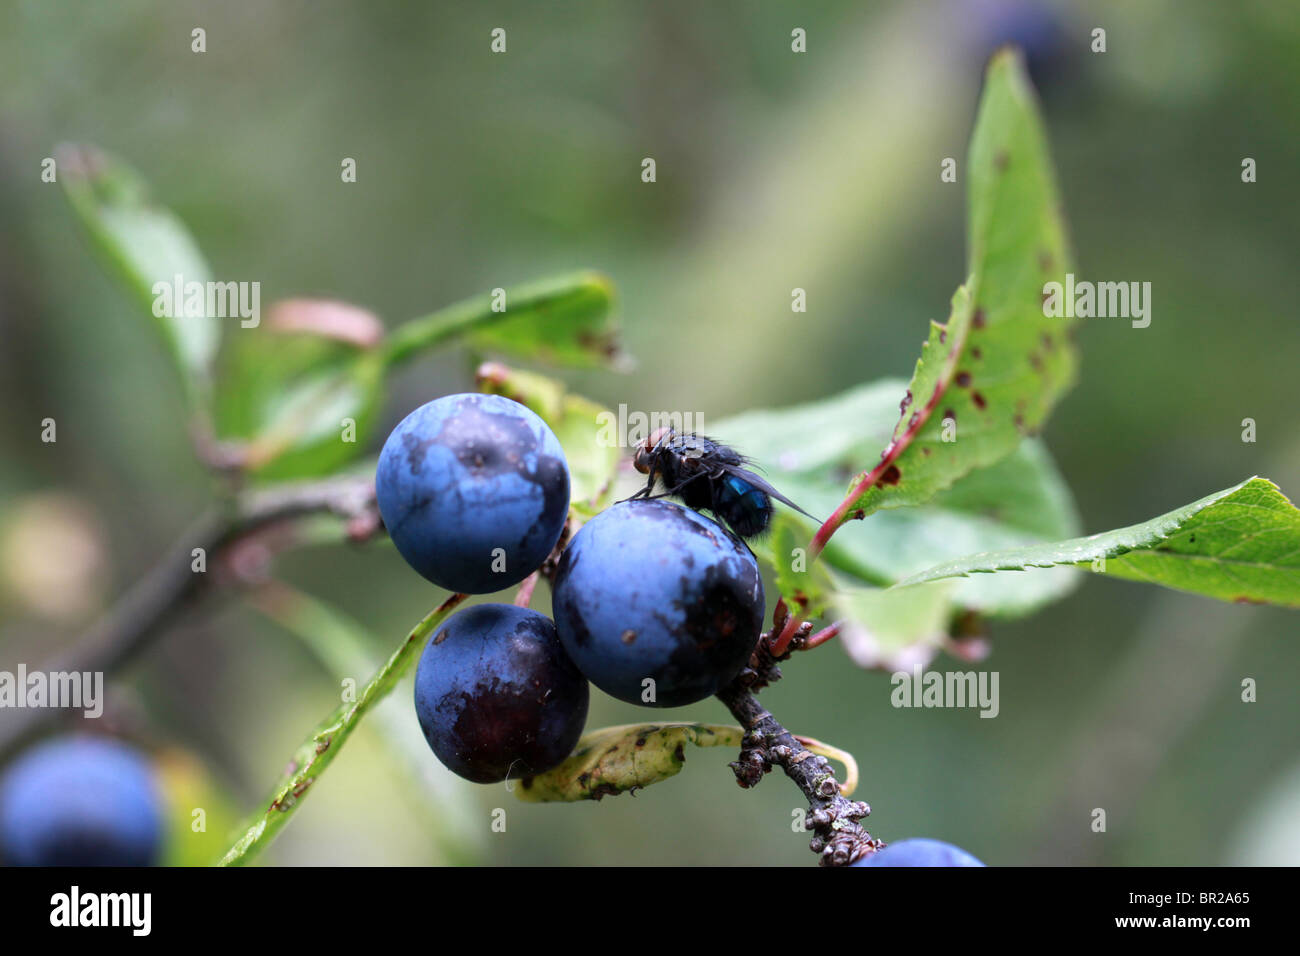 sloe or blackthorn fruits and leaves, with a bluebottle fly Stock Photo